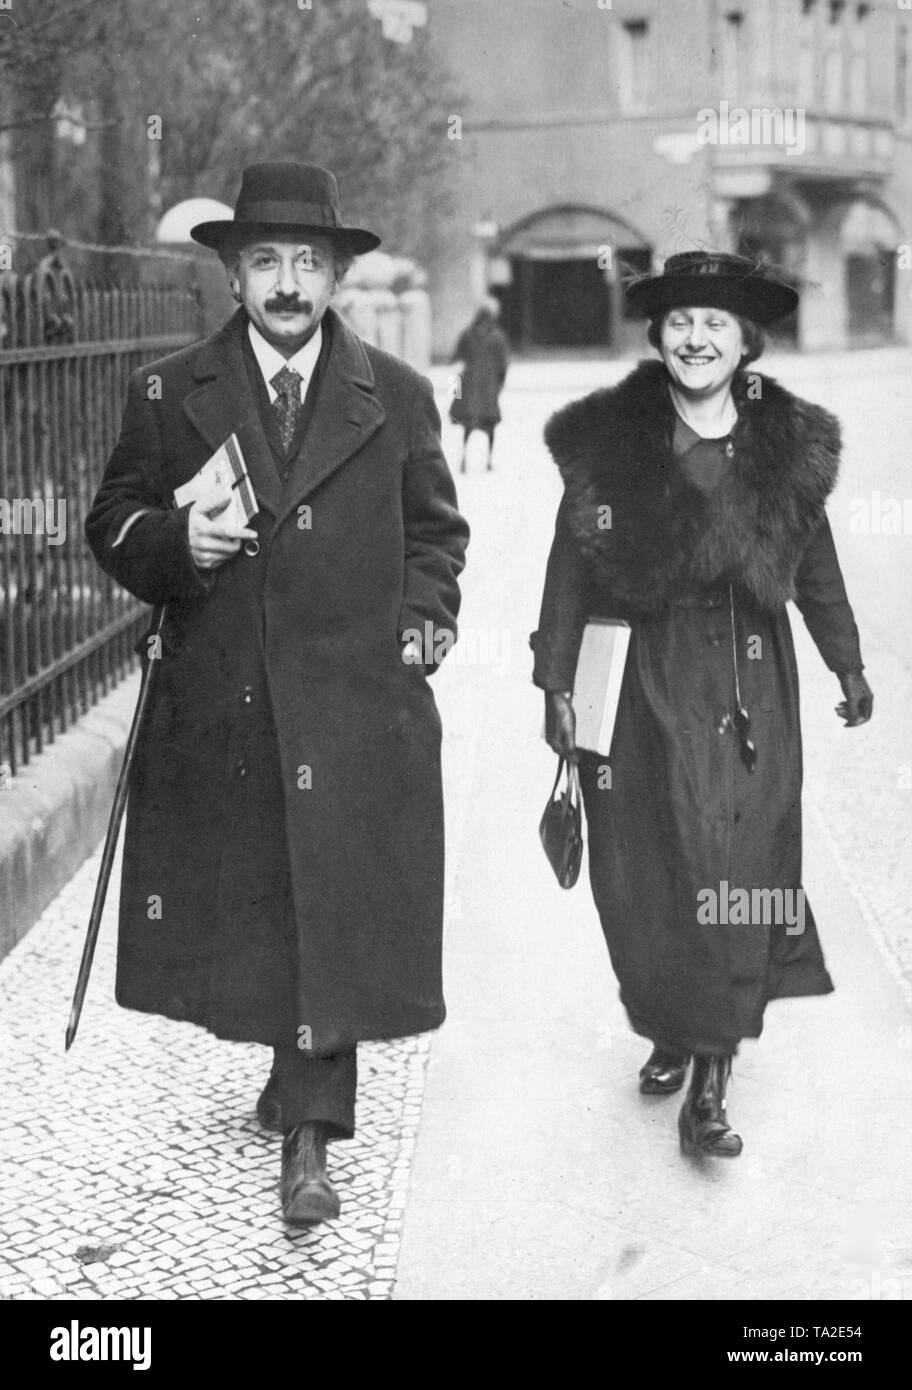 The German physicist and Nobel laureate Albert Einstein (1879-1955) and his wife in Berlin, probably in the Haberlandstrasse in the Bavarian Quarter in Berlin. Stock Photo